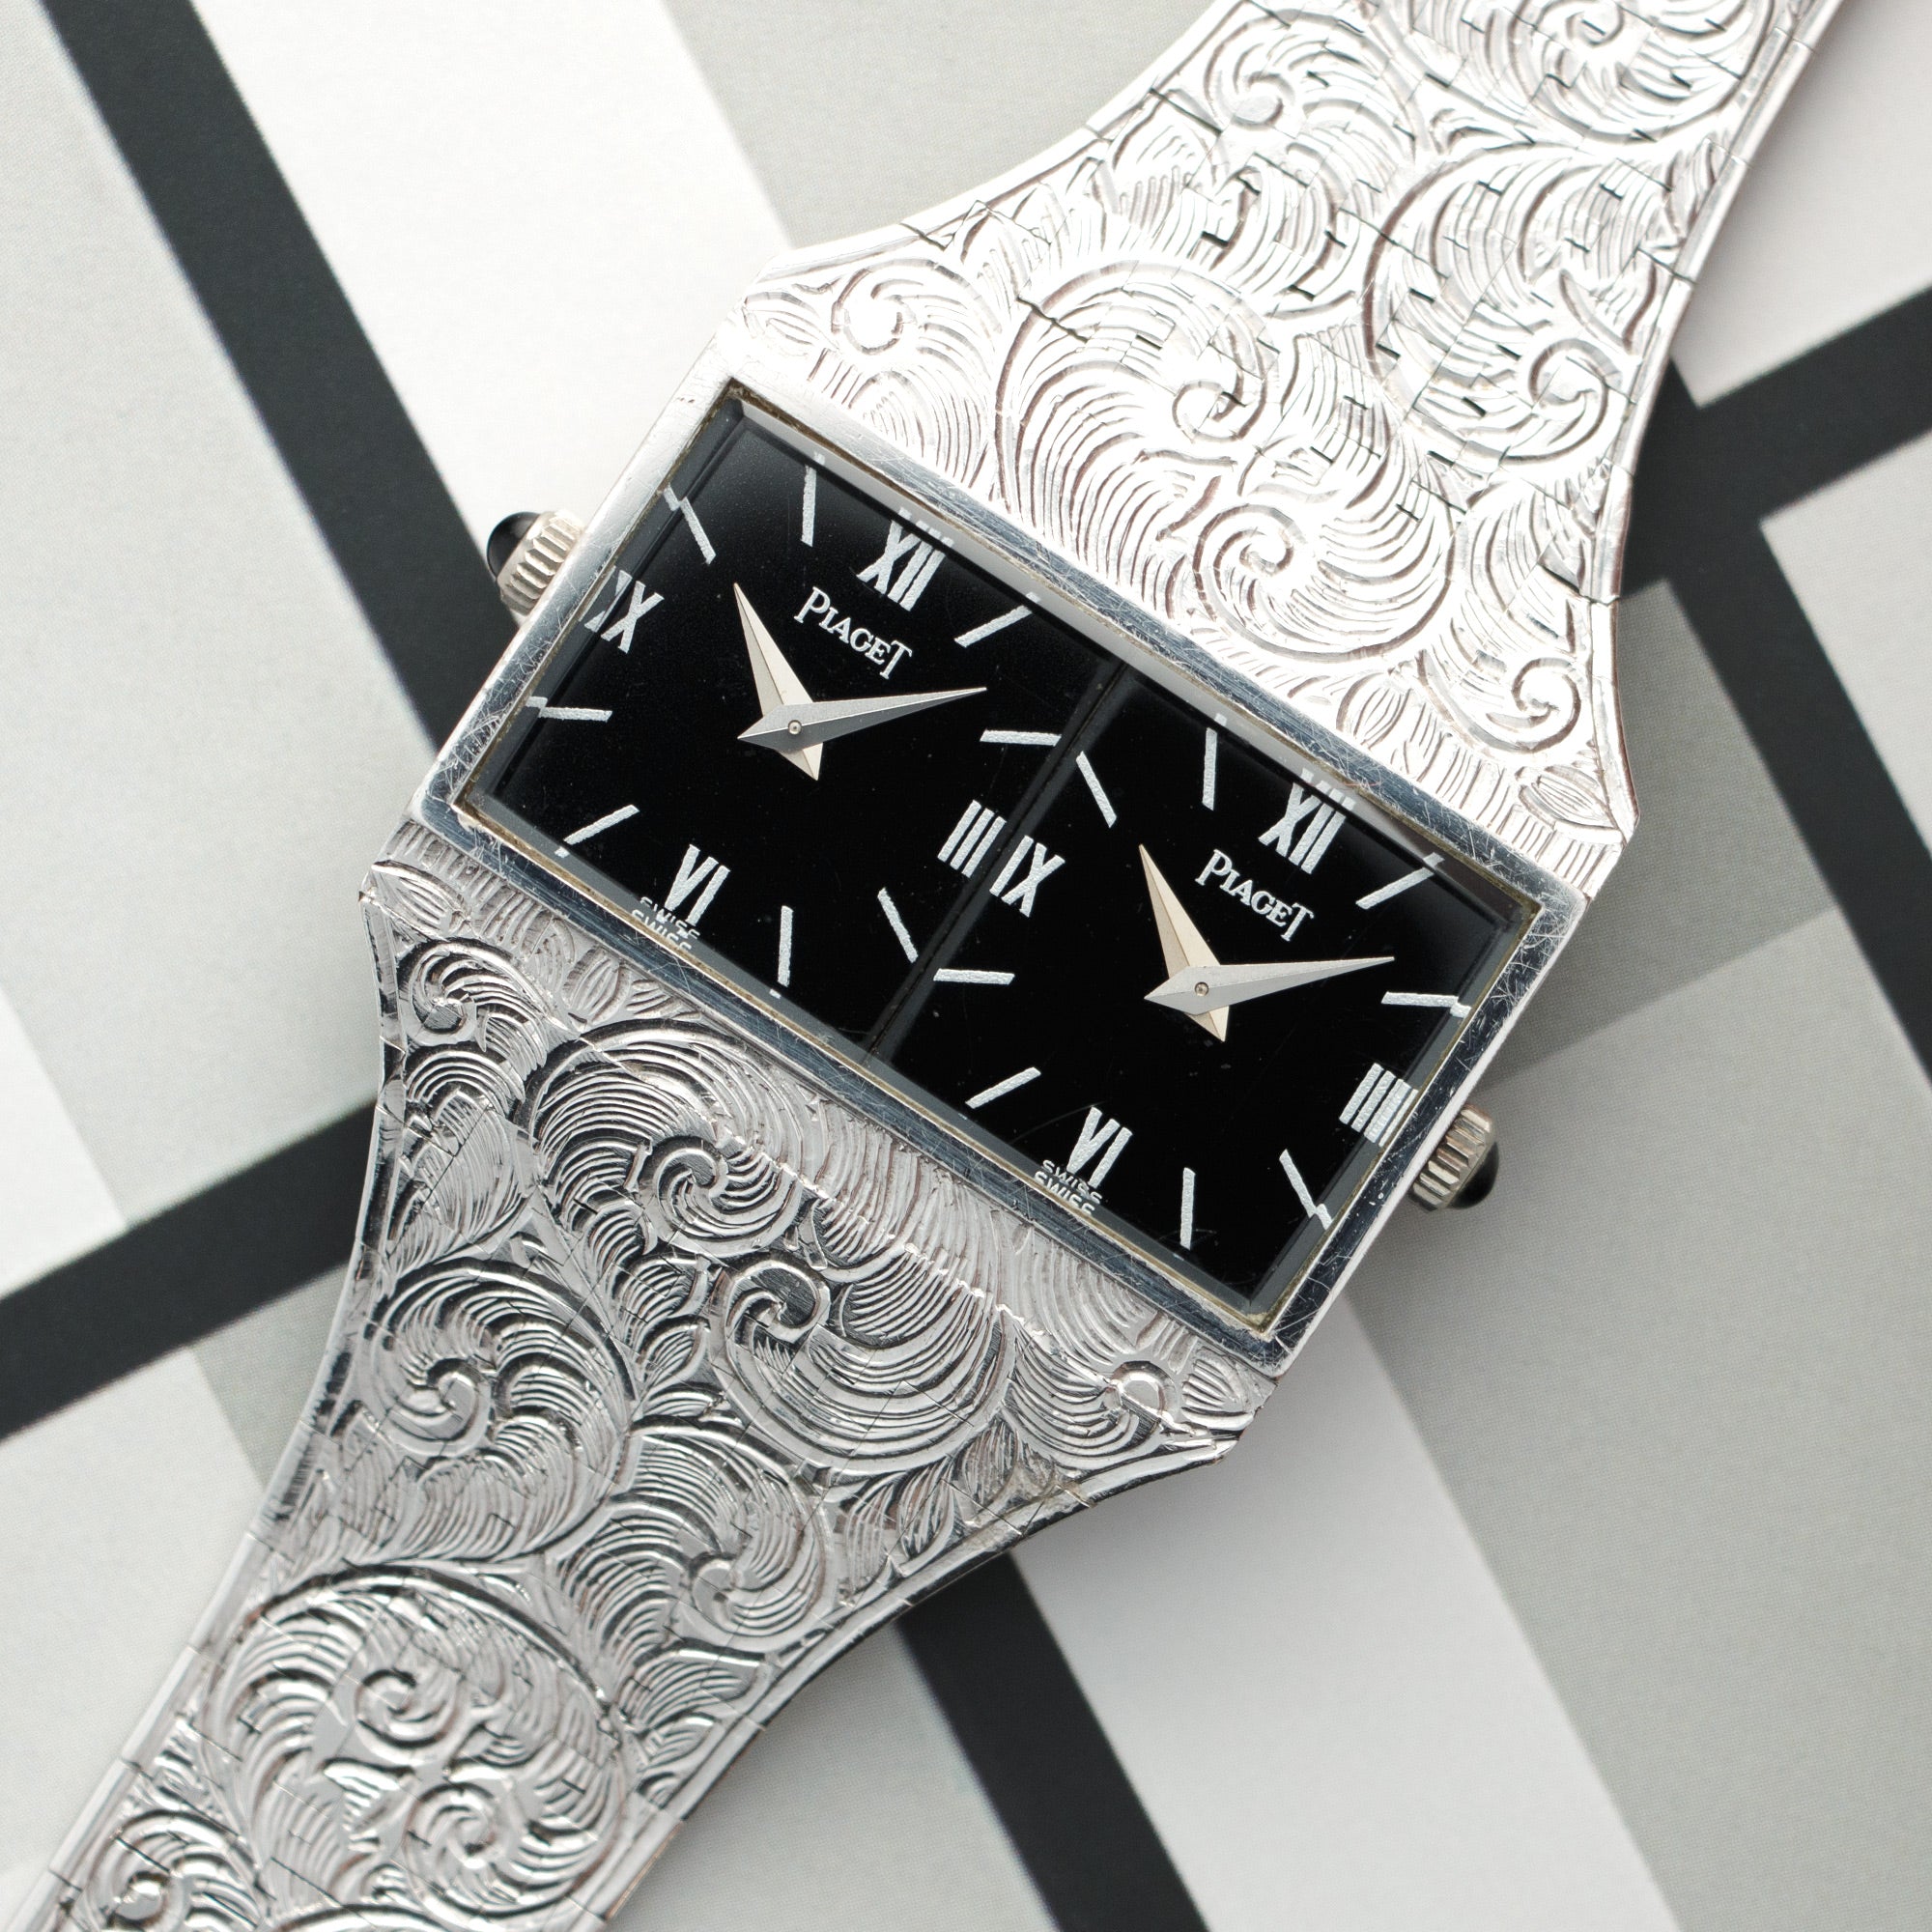 Piaget - Piaget White Gold Dual Time Hand Engraved Watch - The Keystone Watches